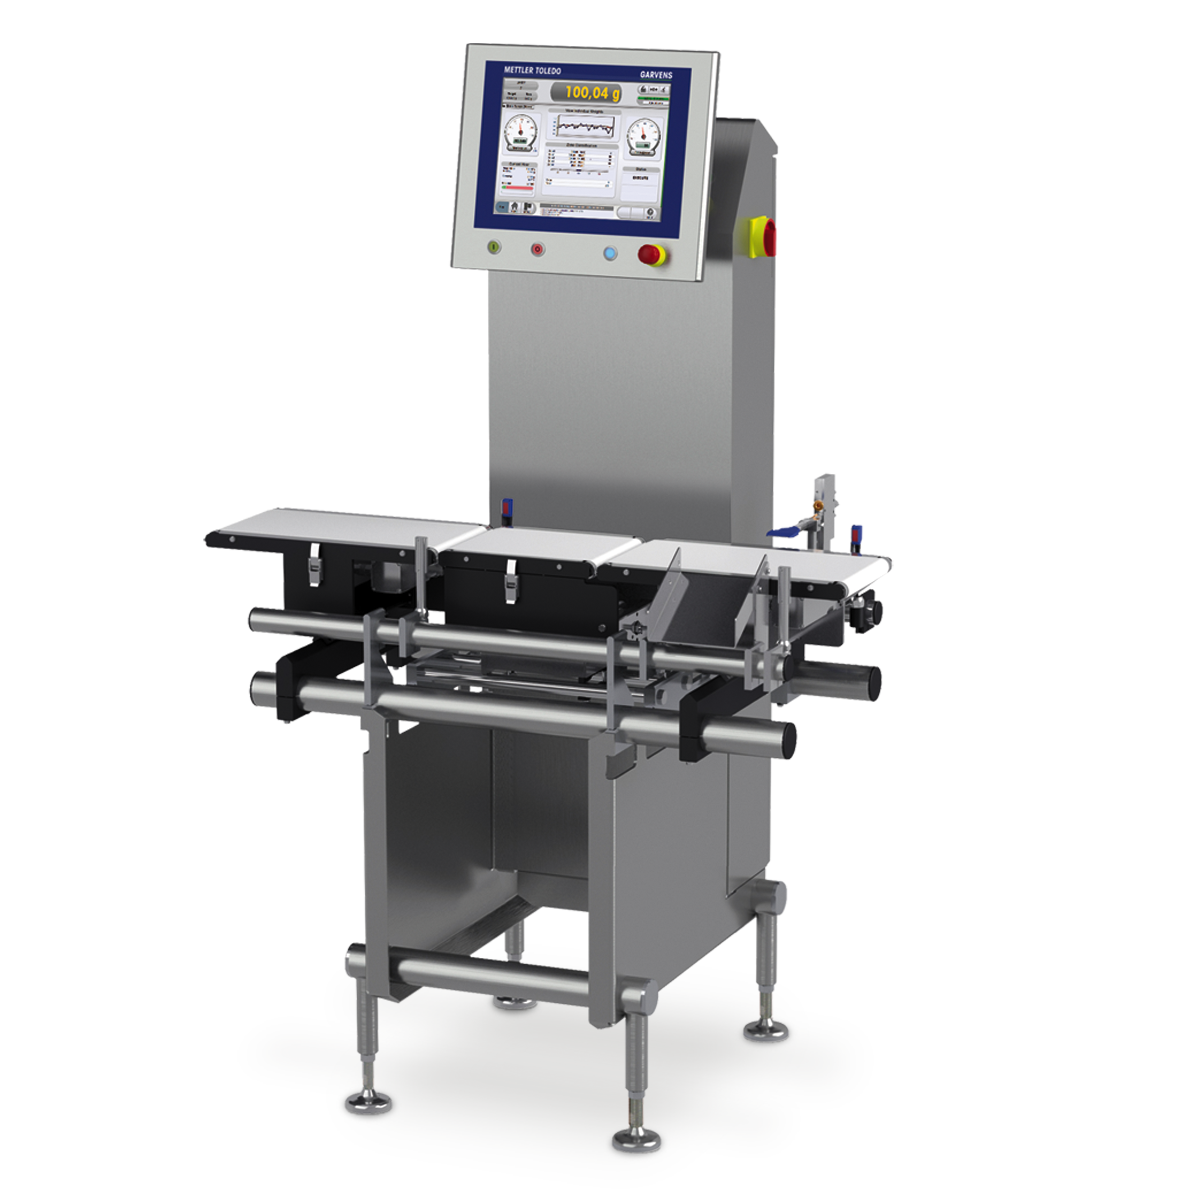 Mettler-Toledo: Checkweighing systems